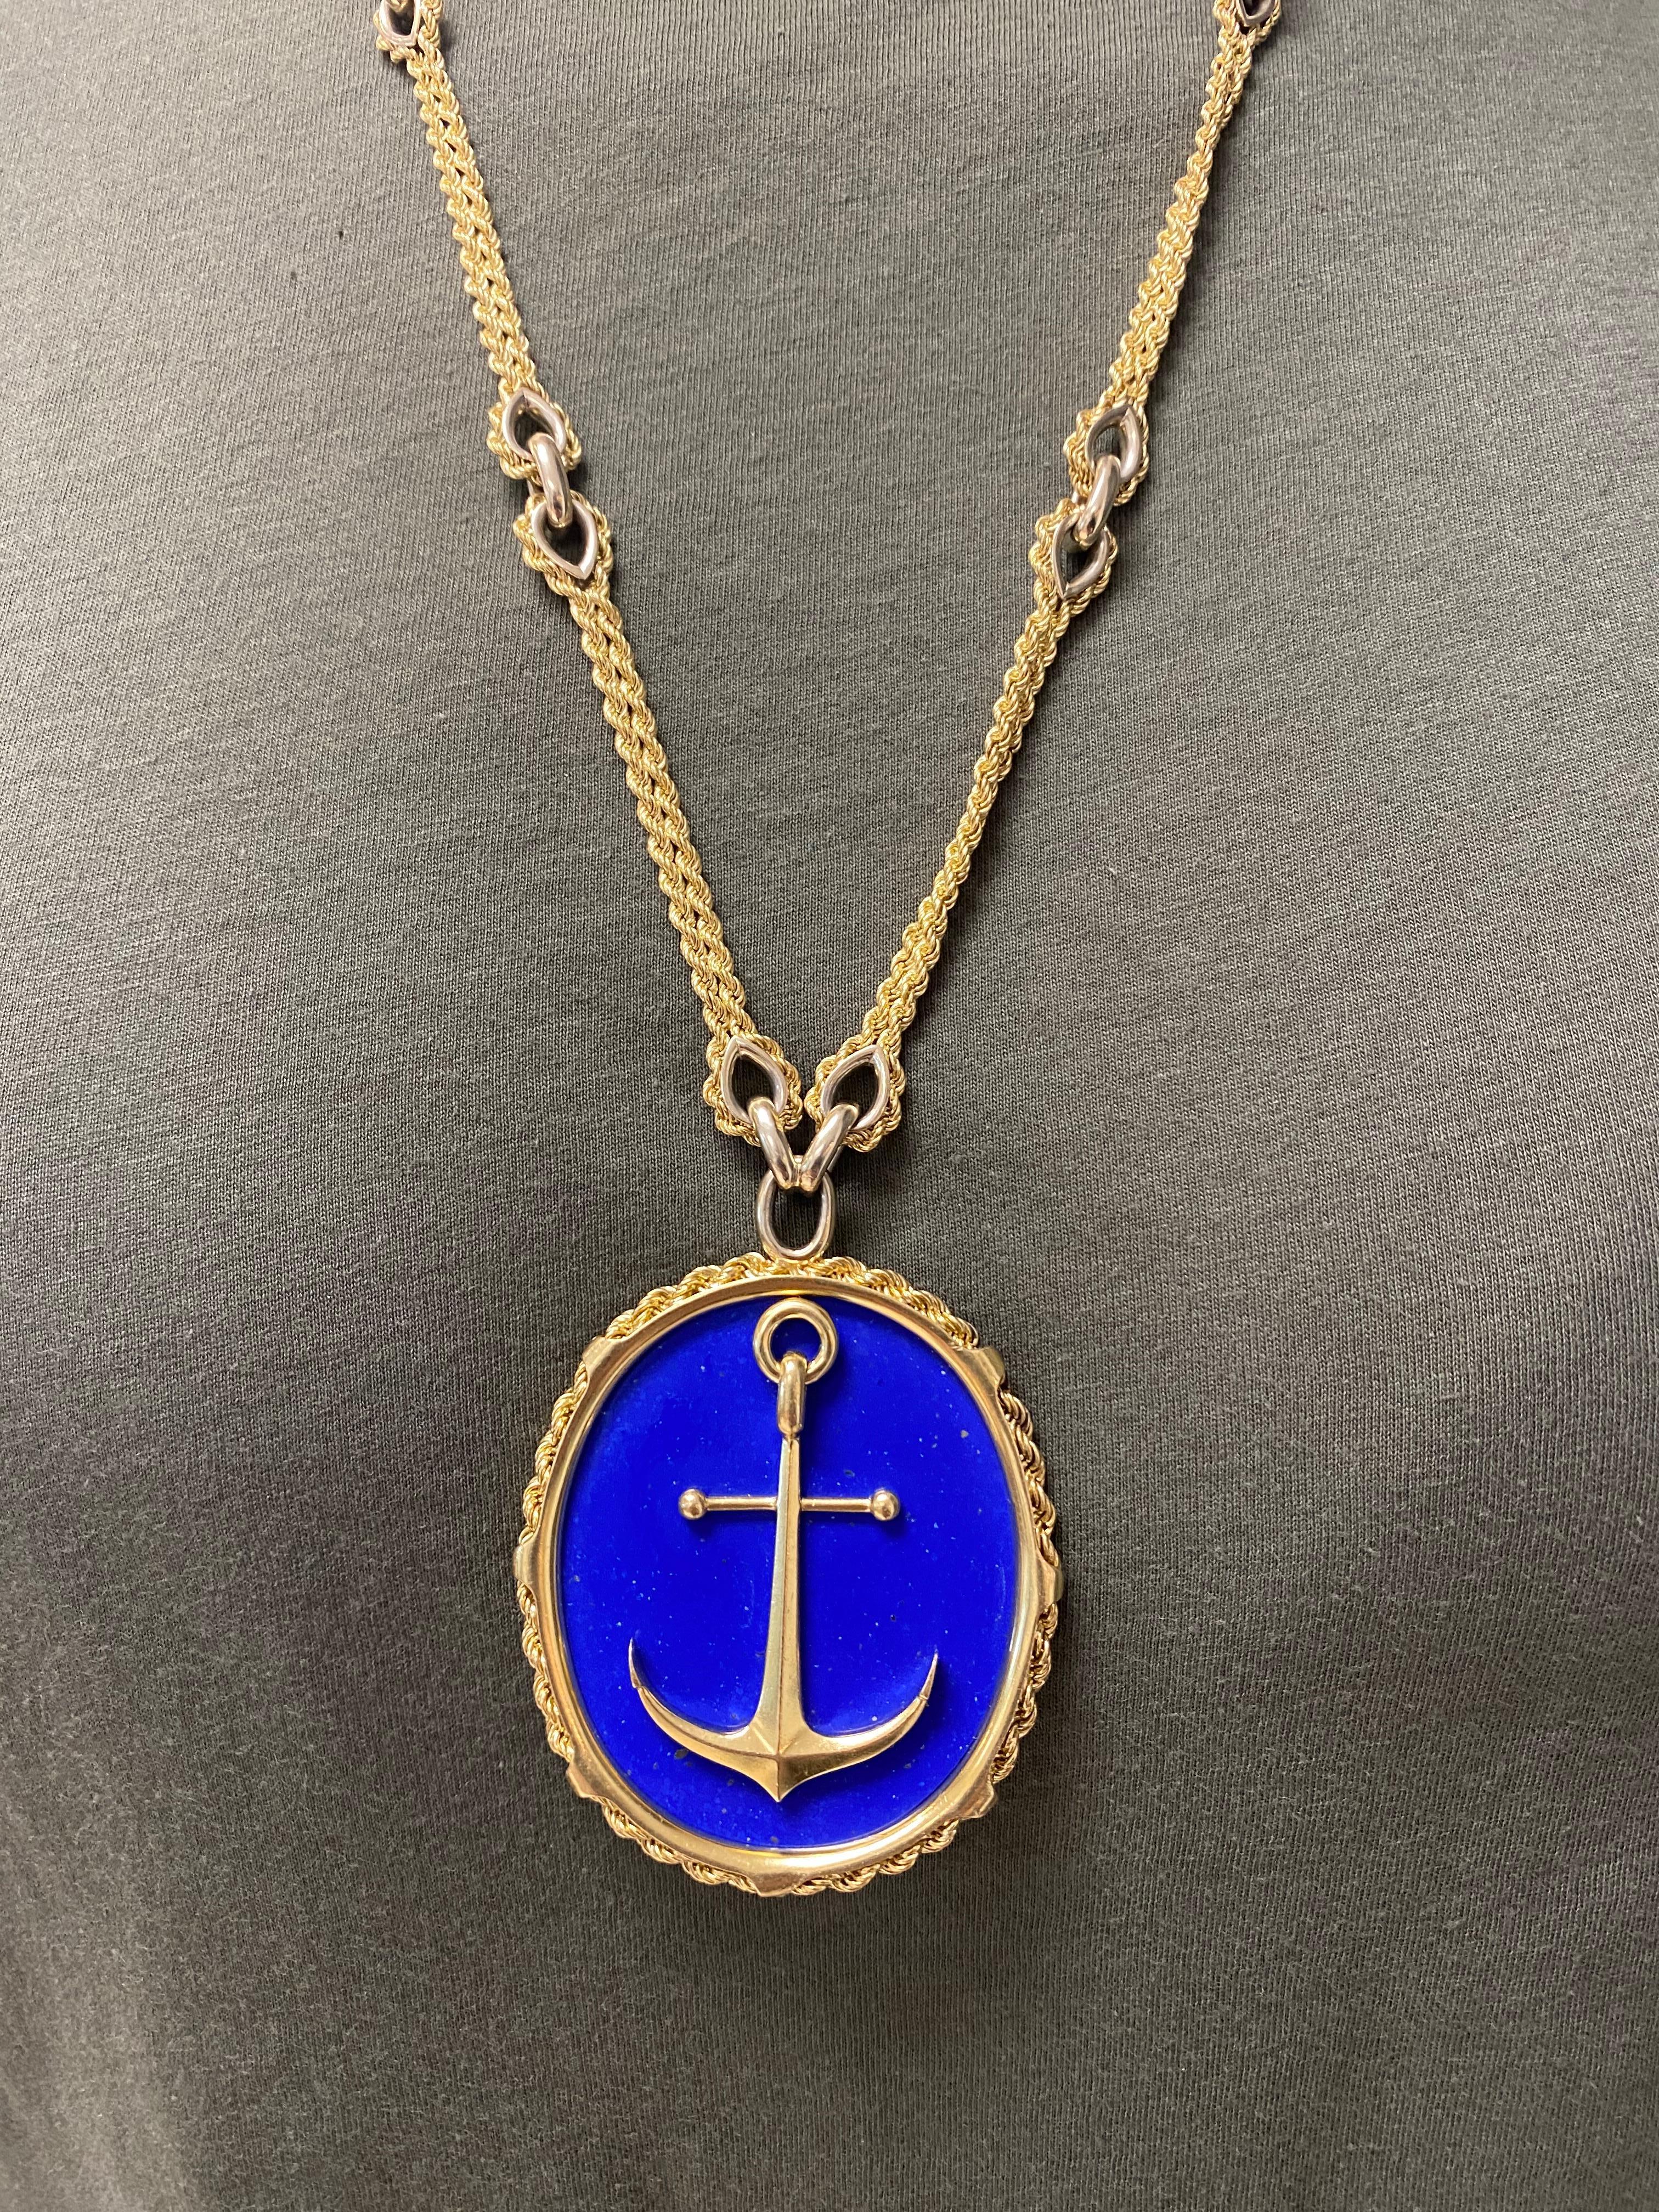 Vintage Piaget Yellow Gold and Lapis  Anchor Penchant Chain Necklace 5